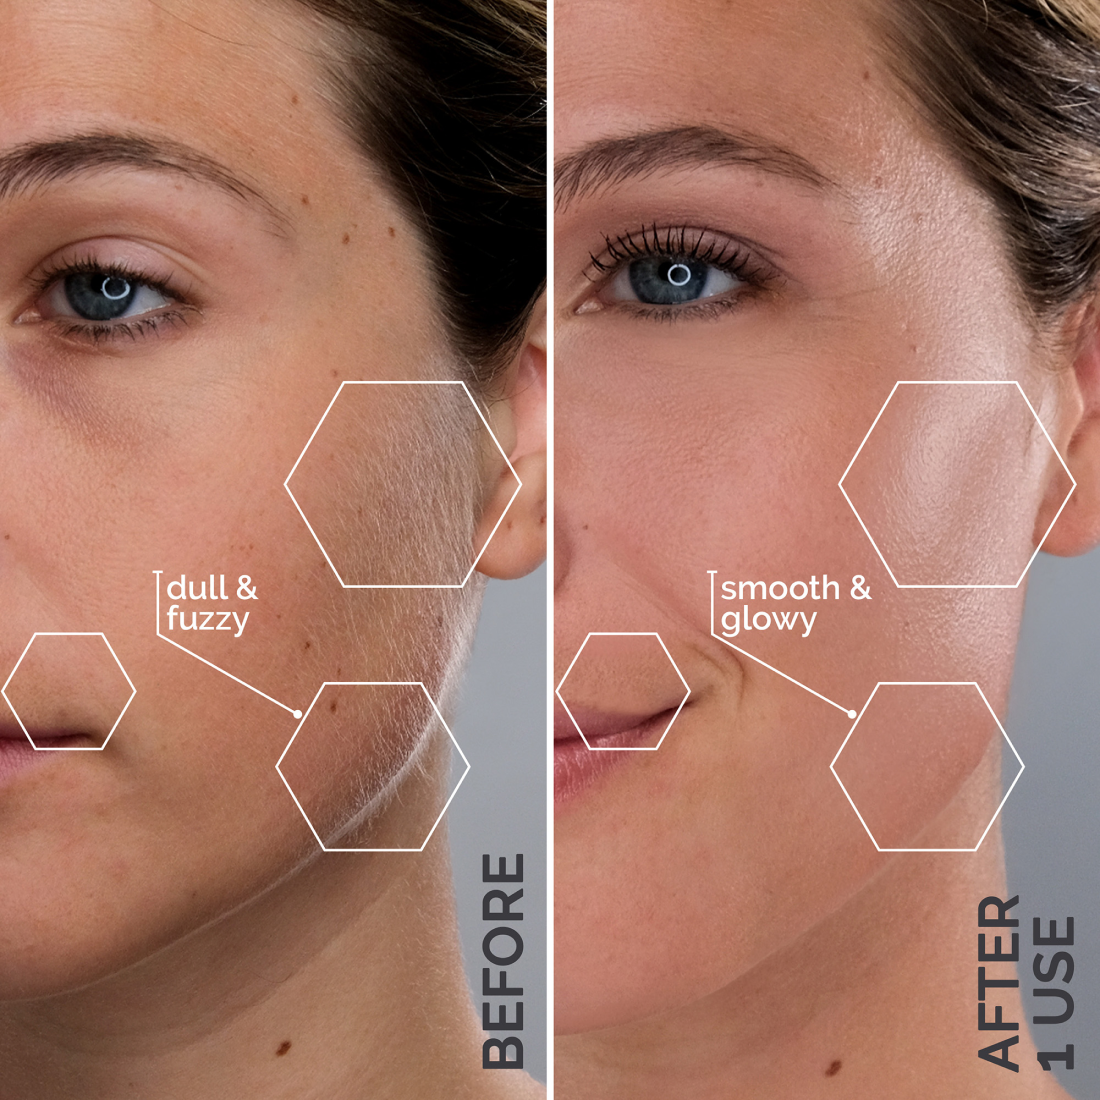 Before and after photos of a woman's face showcasing her radiant complexion after using Michael Todd Beauty's 2-Piece Best Sellers Kit.